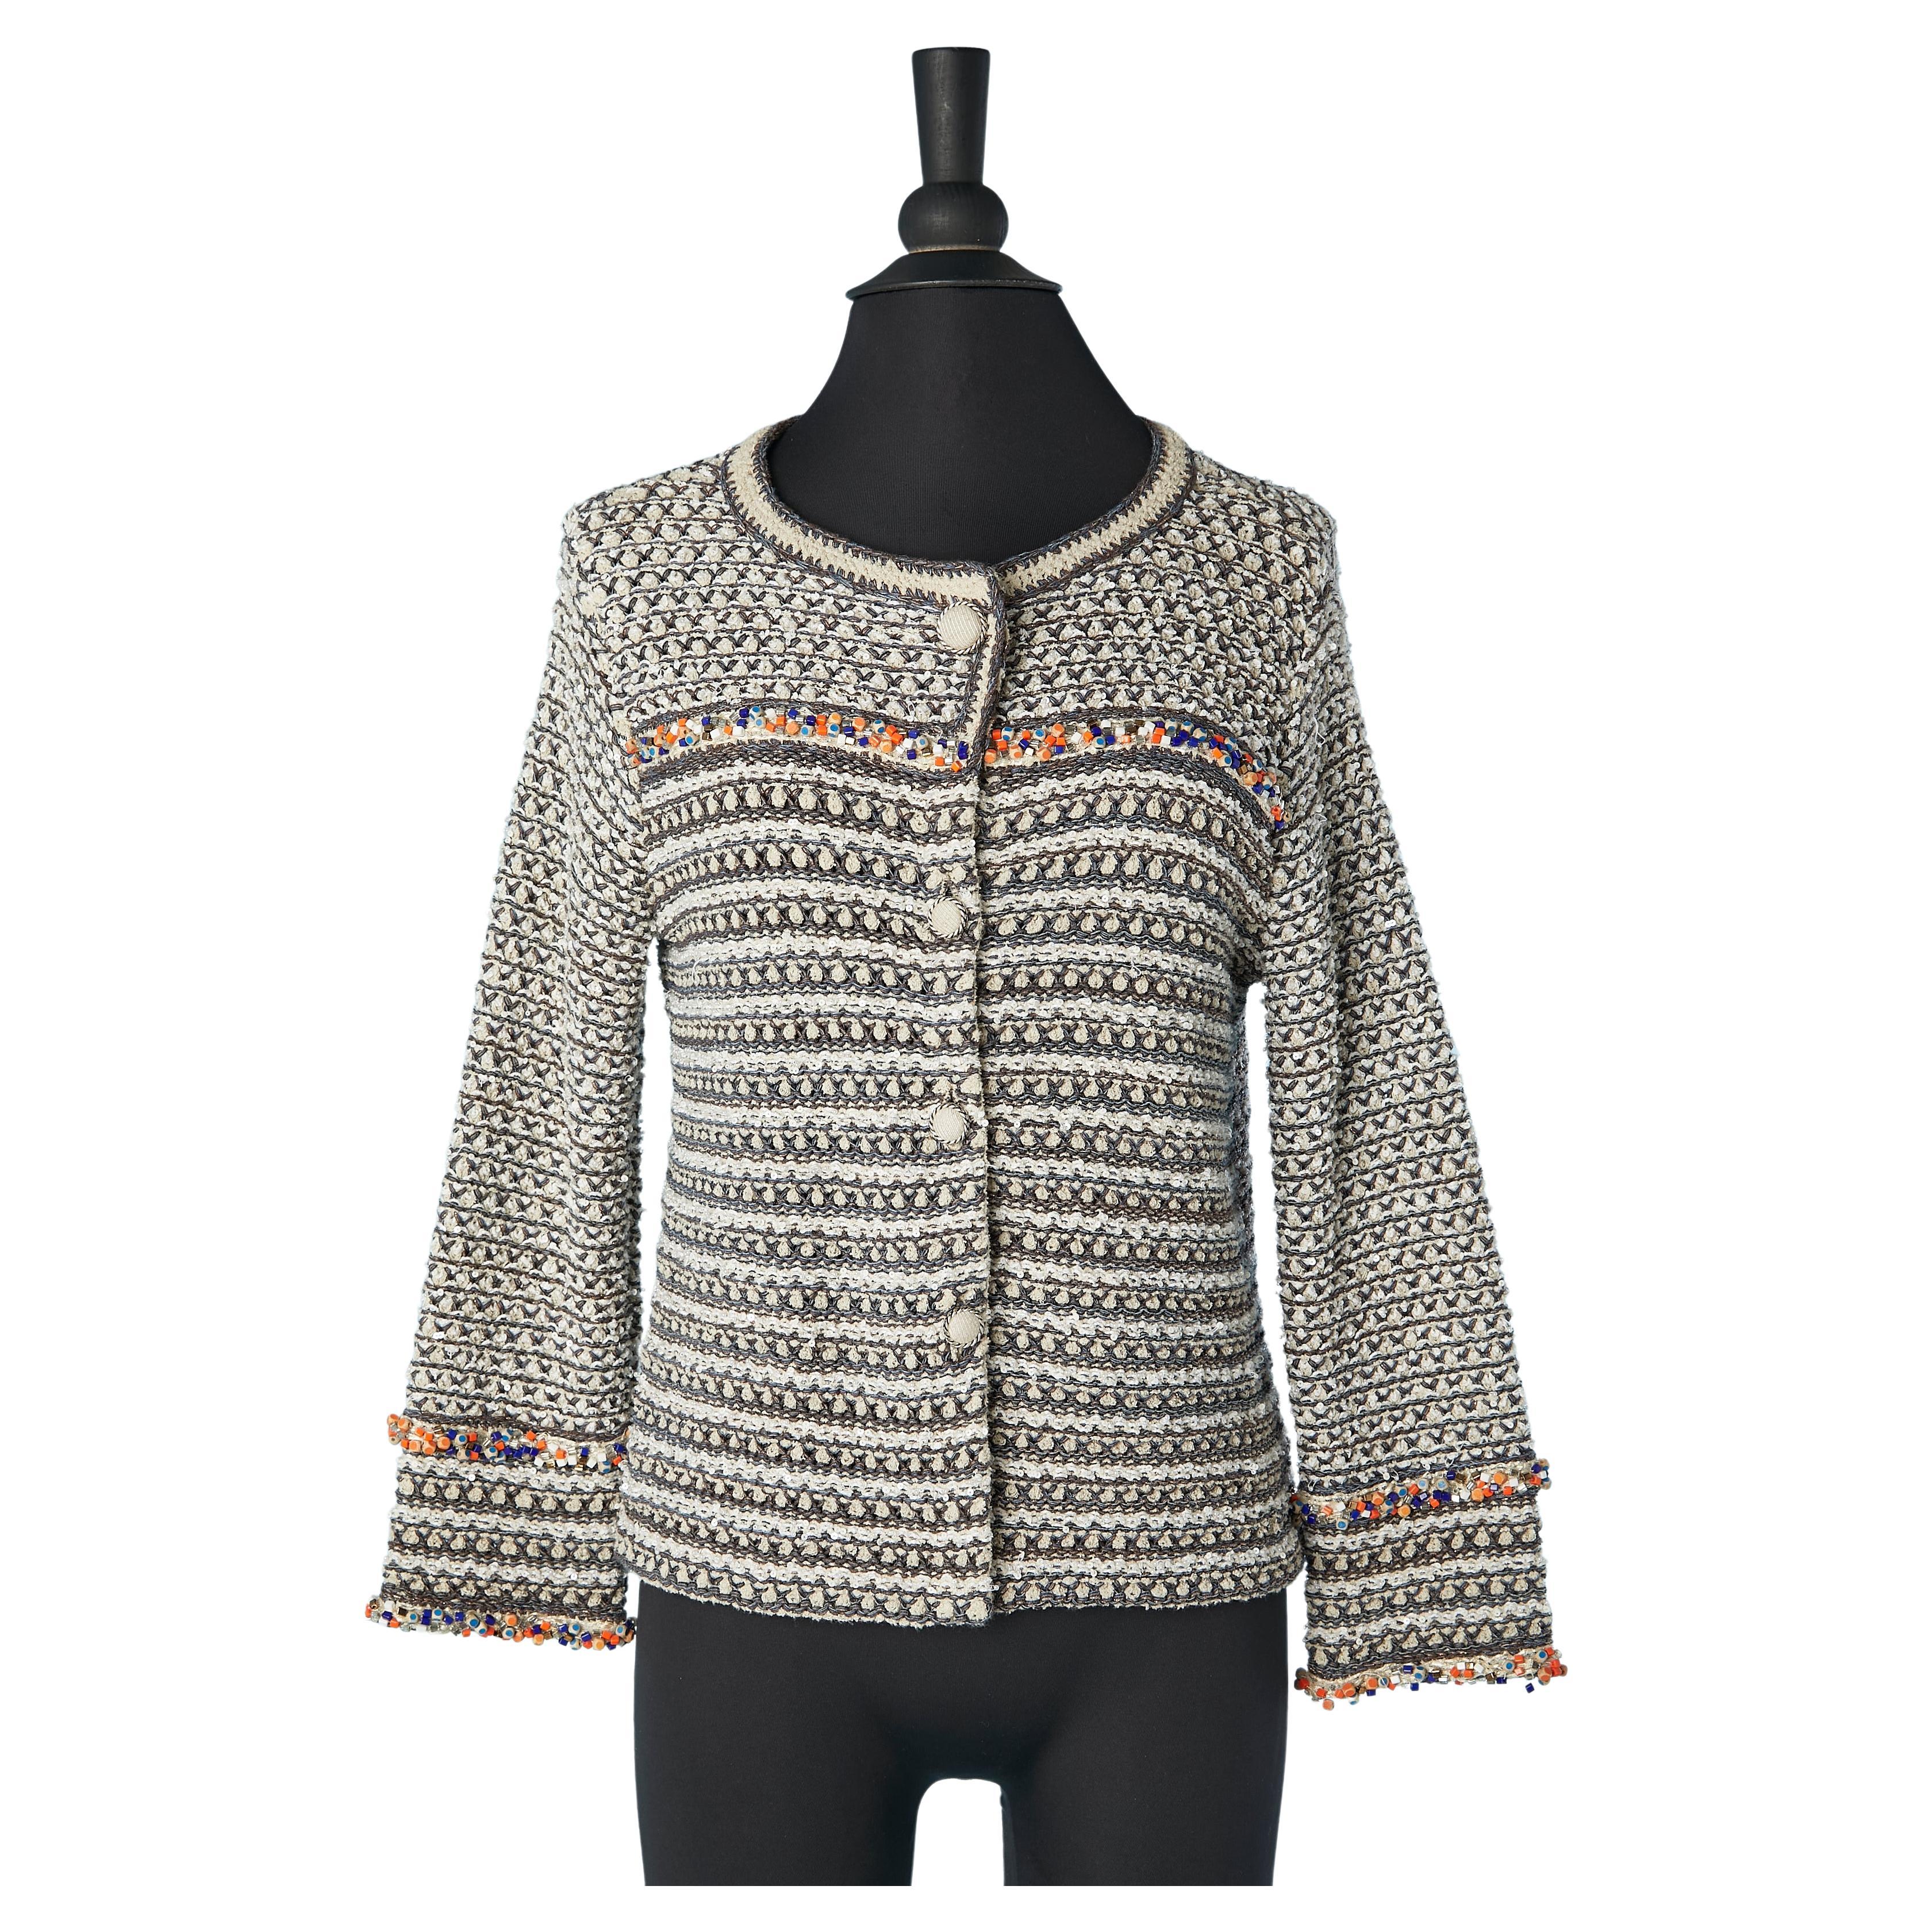 Karl Lagerfeld for Chanel Lurex Jacquard Cardigan with Beadwork Chanel